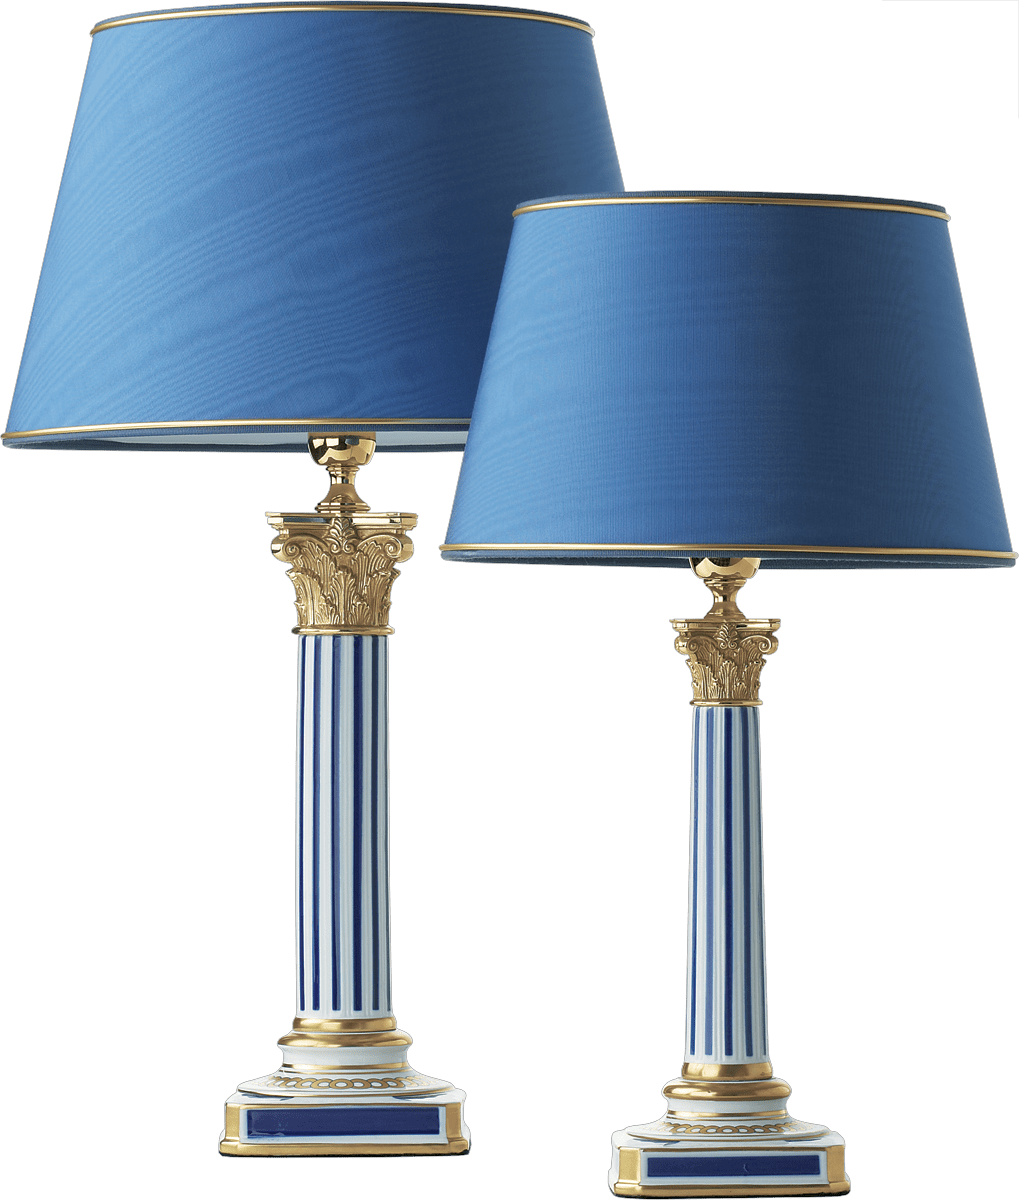 TABLE LAMP 3518